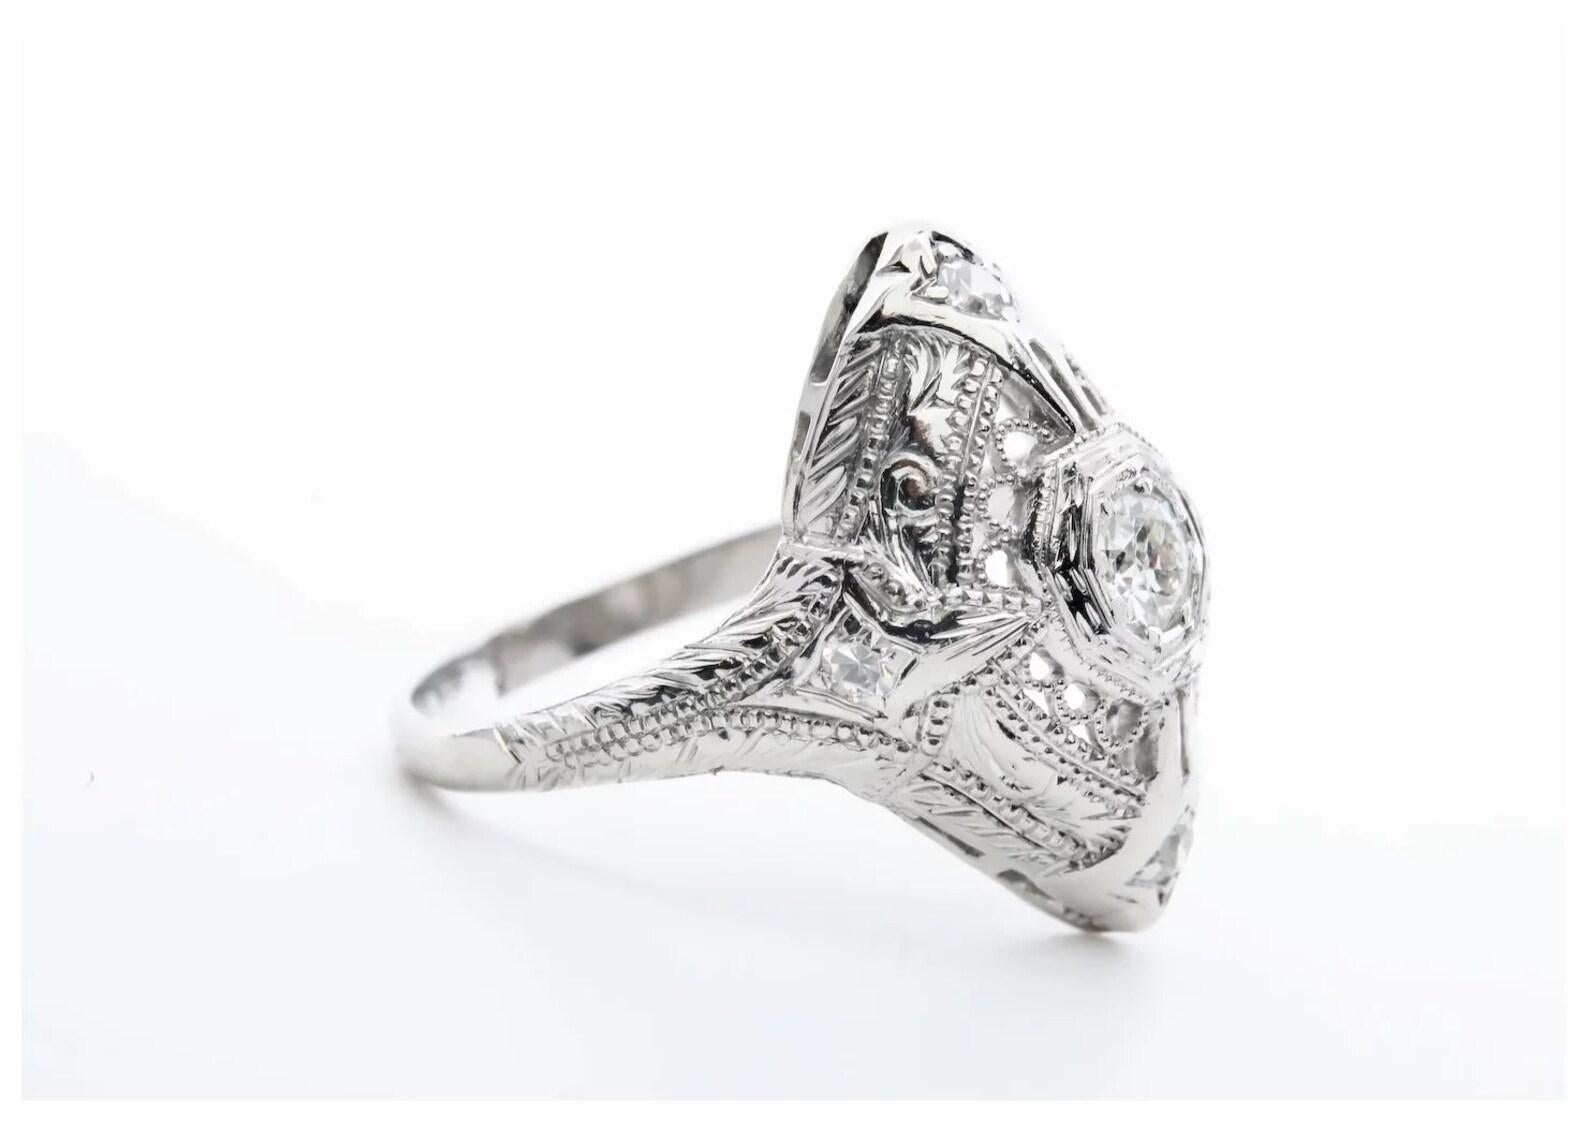 A handmade Art Deco period diamond filigree ring in platinum. Centering this dome style ring is a 0.20 carat old European cut diamond accented by four additional pave set diamonds. Grading as H color, VS clarity the five diamonds have a combined